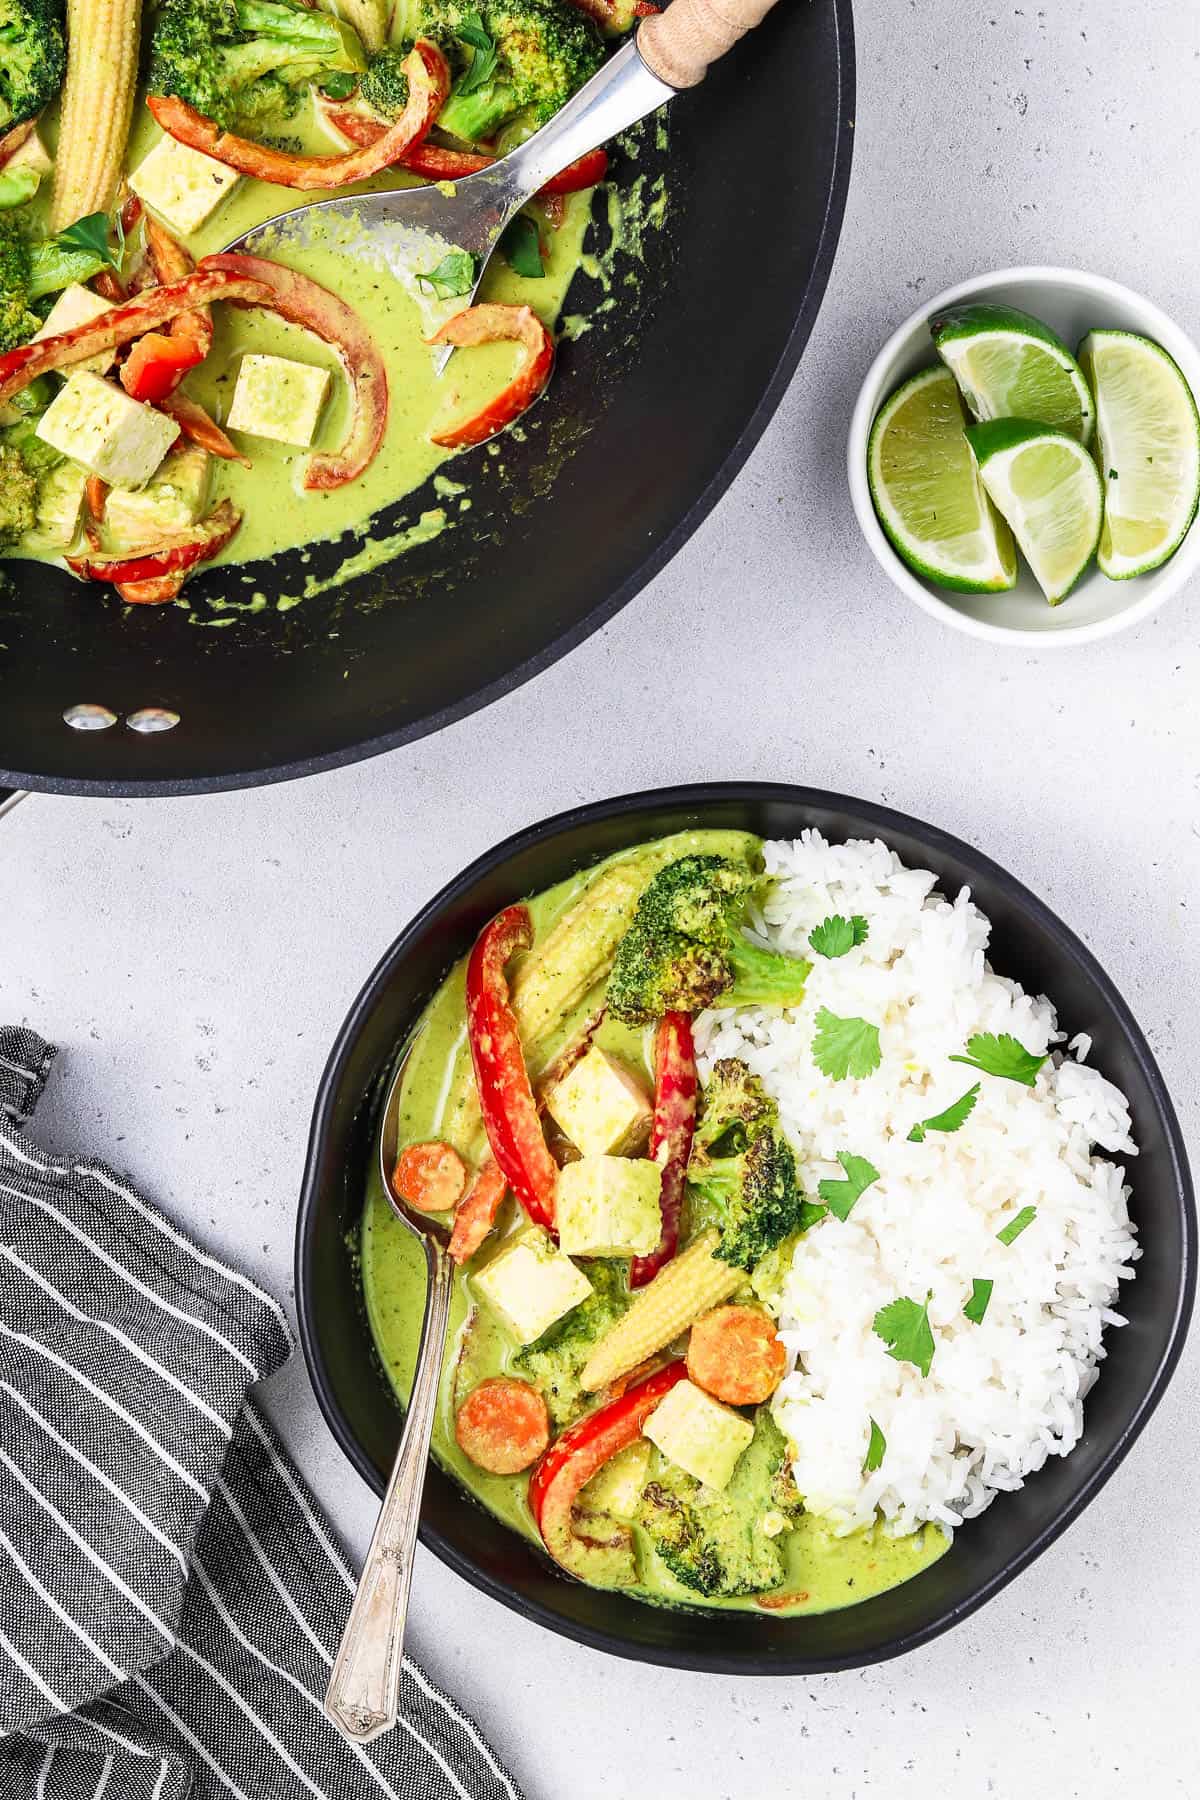 Green thai curry served with rice and lime wedges.